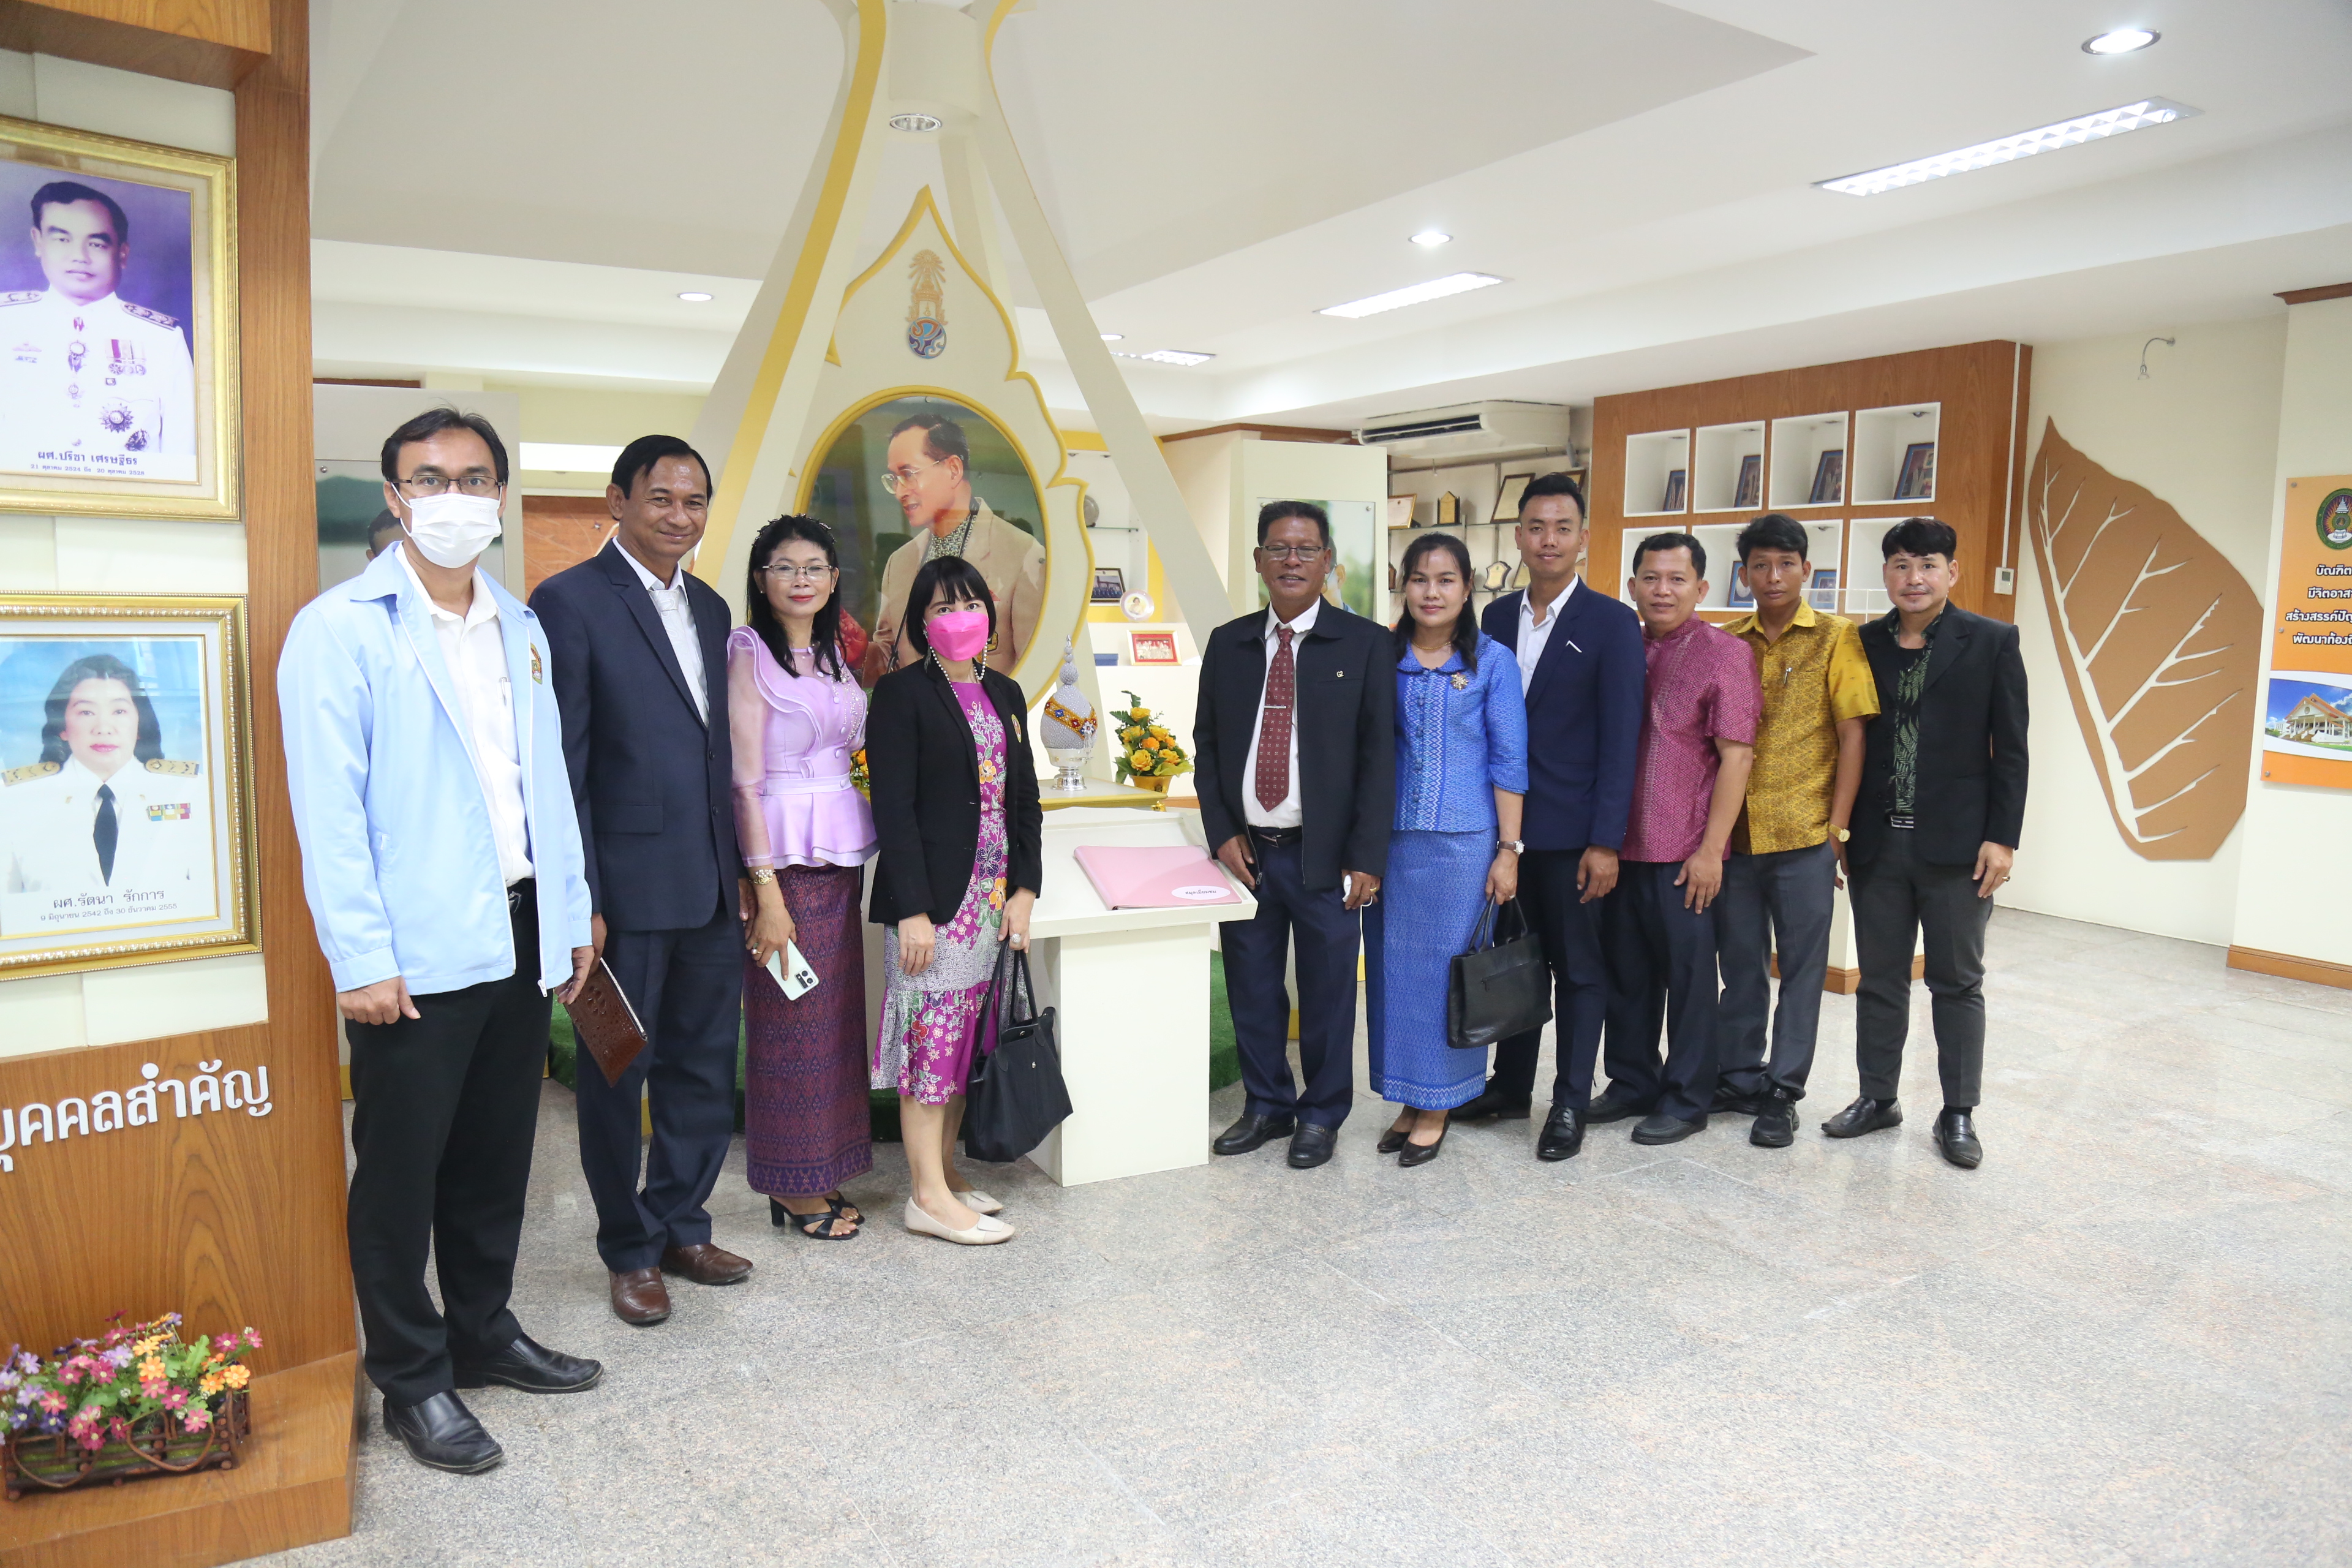 Welcomed Delegations from Provincial Teacher Training College Cambodia on November 15 2022